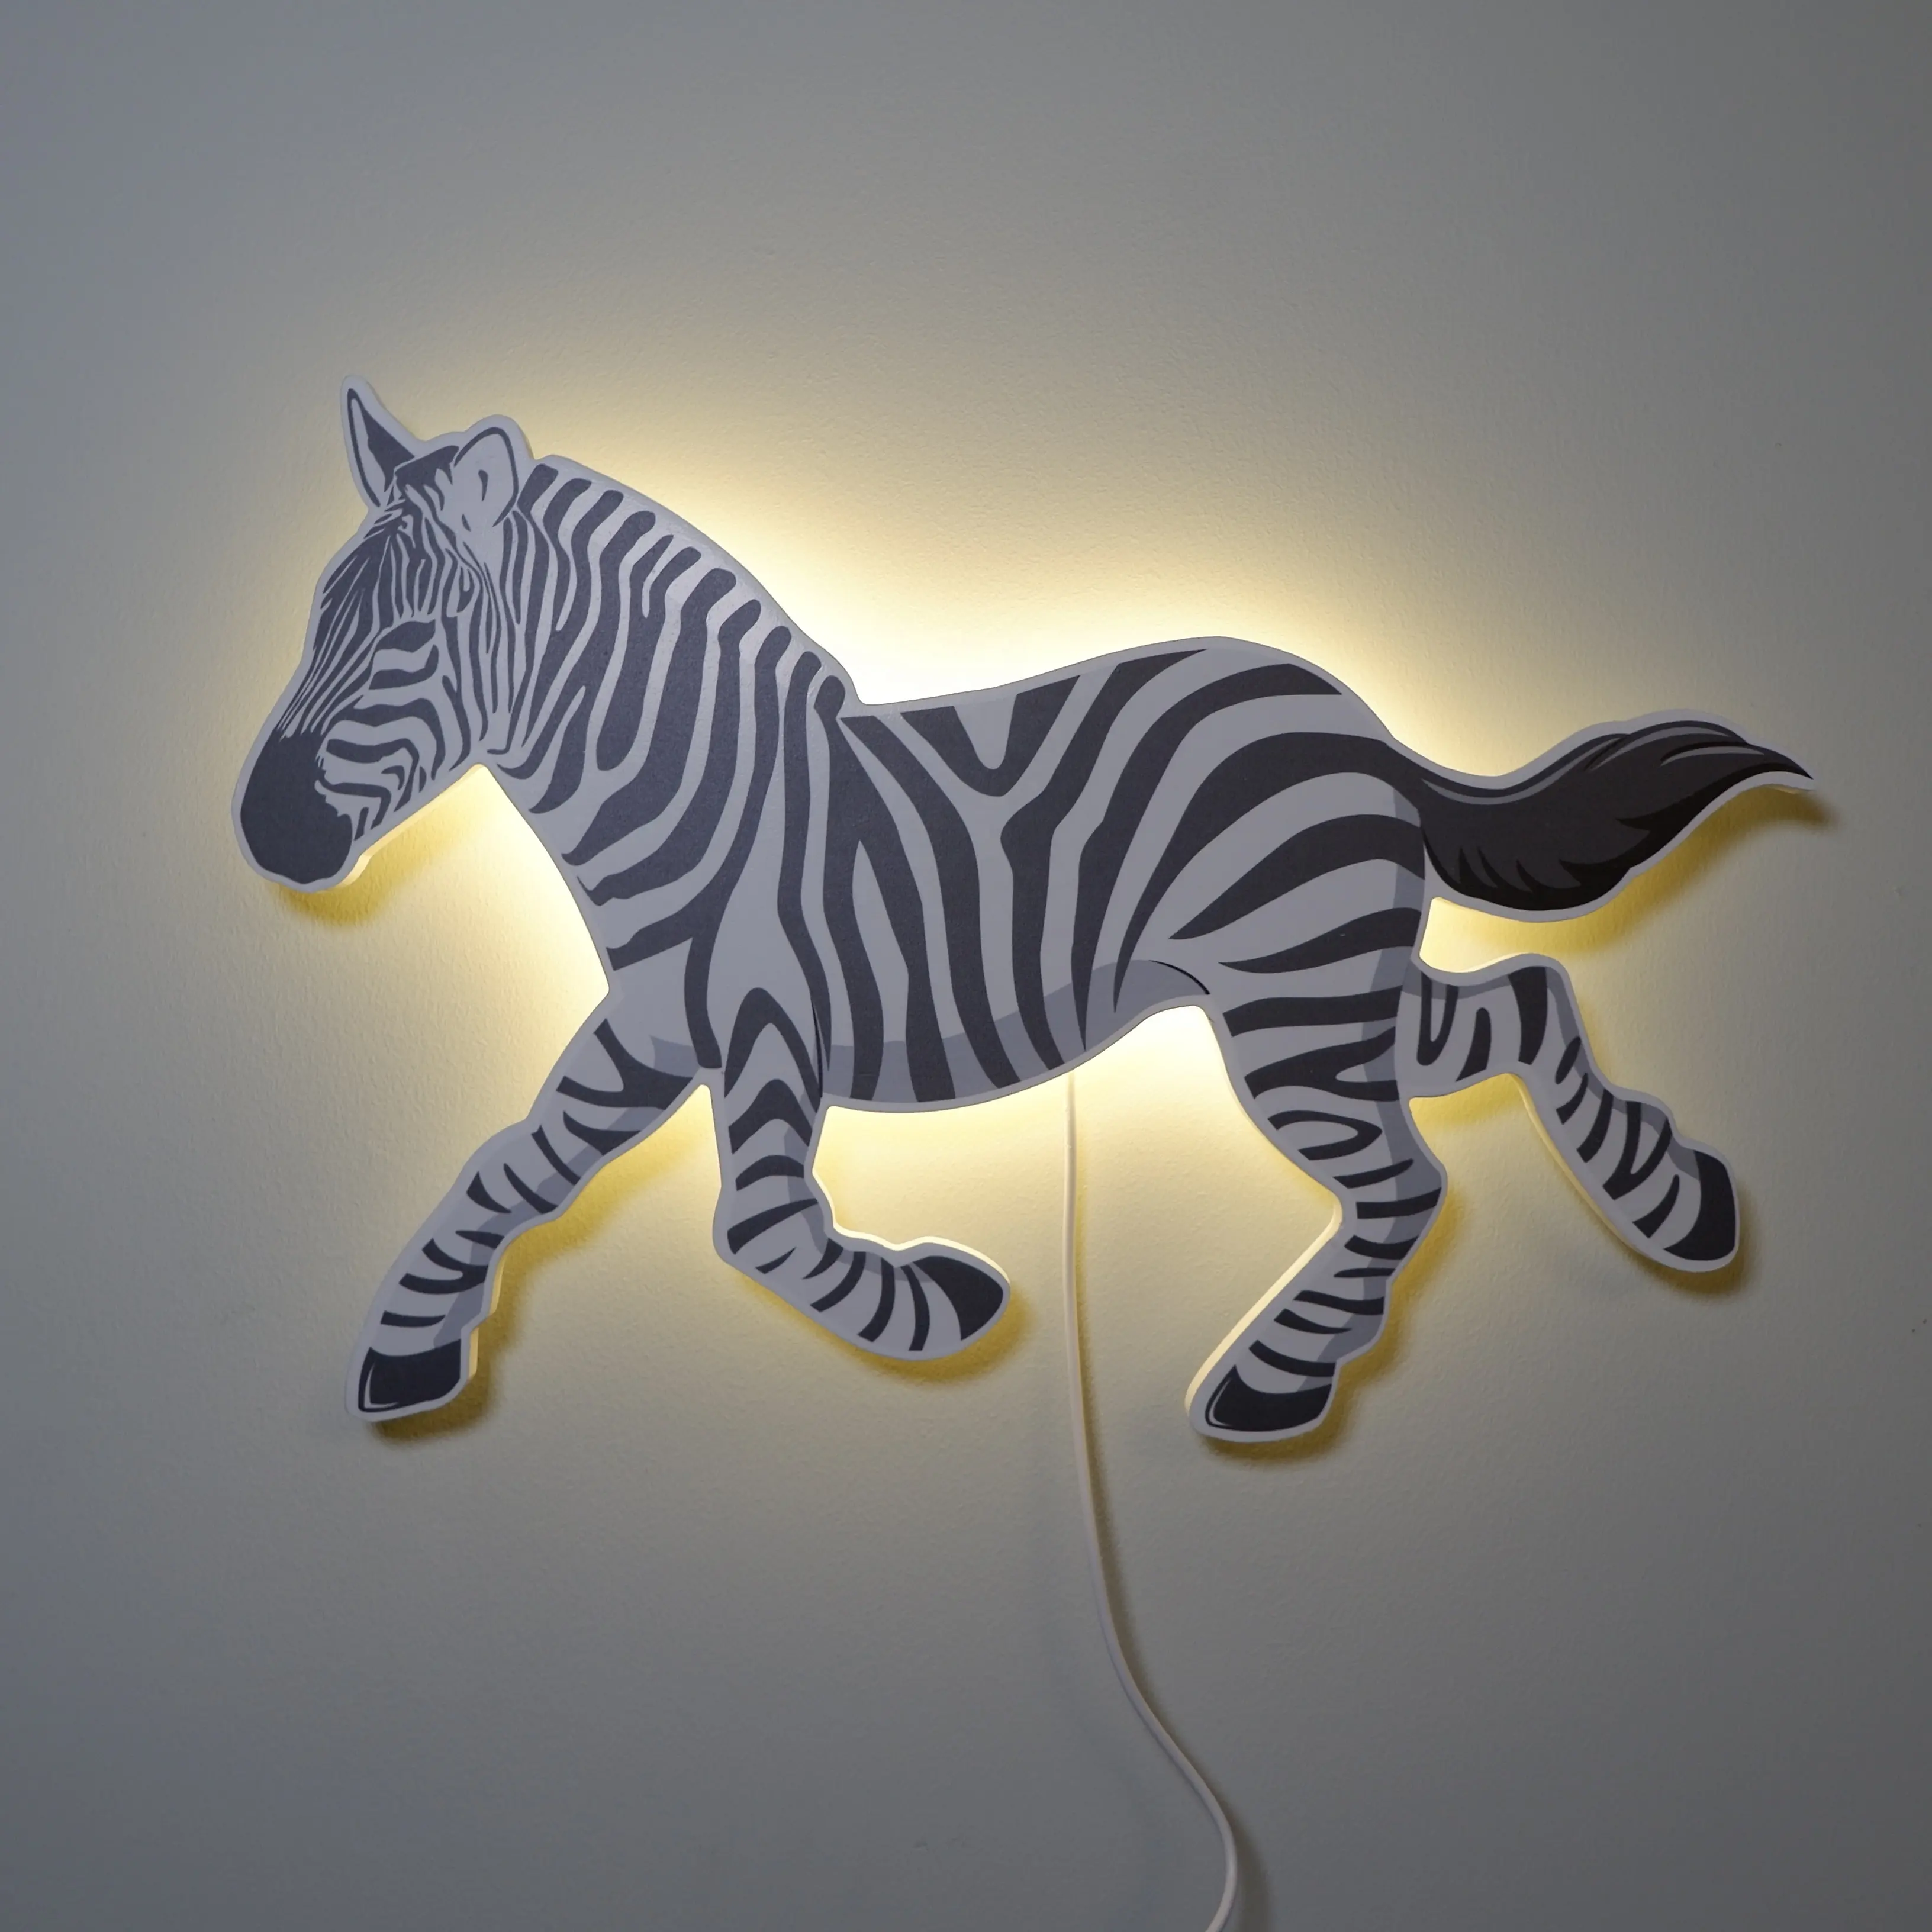 Decorative Zebra Indoor Wall Lamp Light USB Cord Dimmable Modern Wall Light For Living Room Bedroom